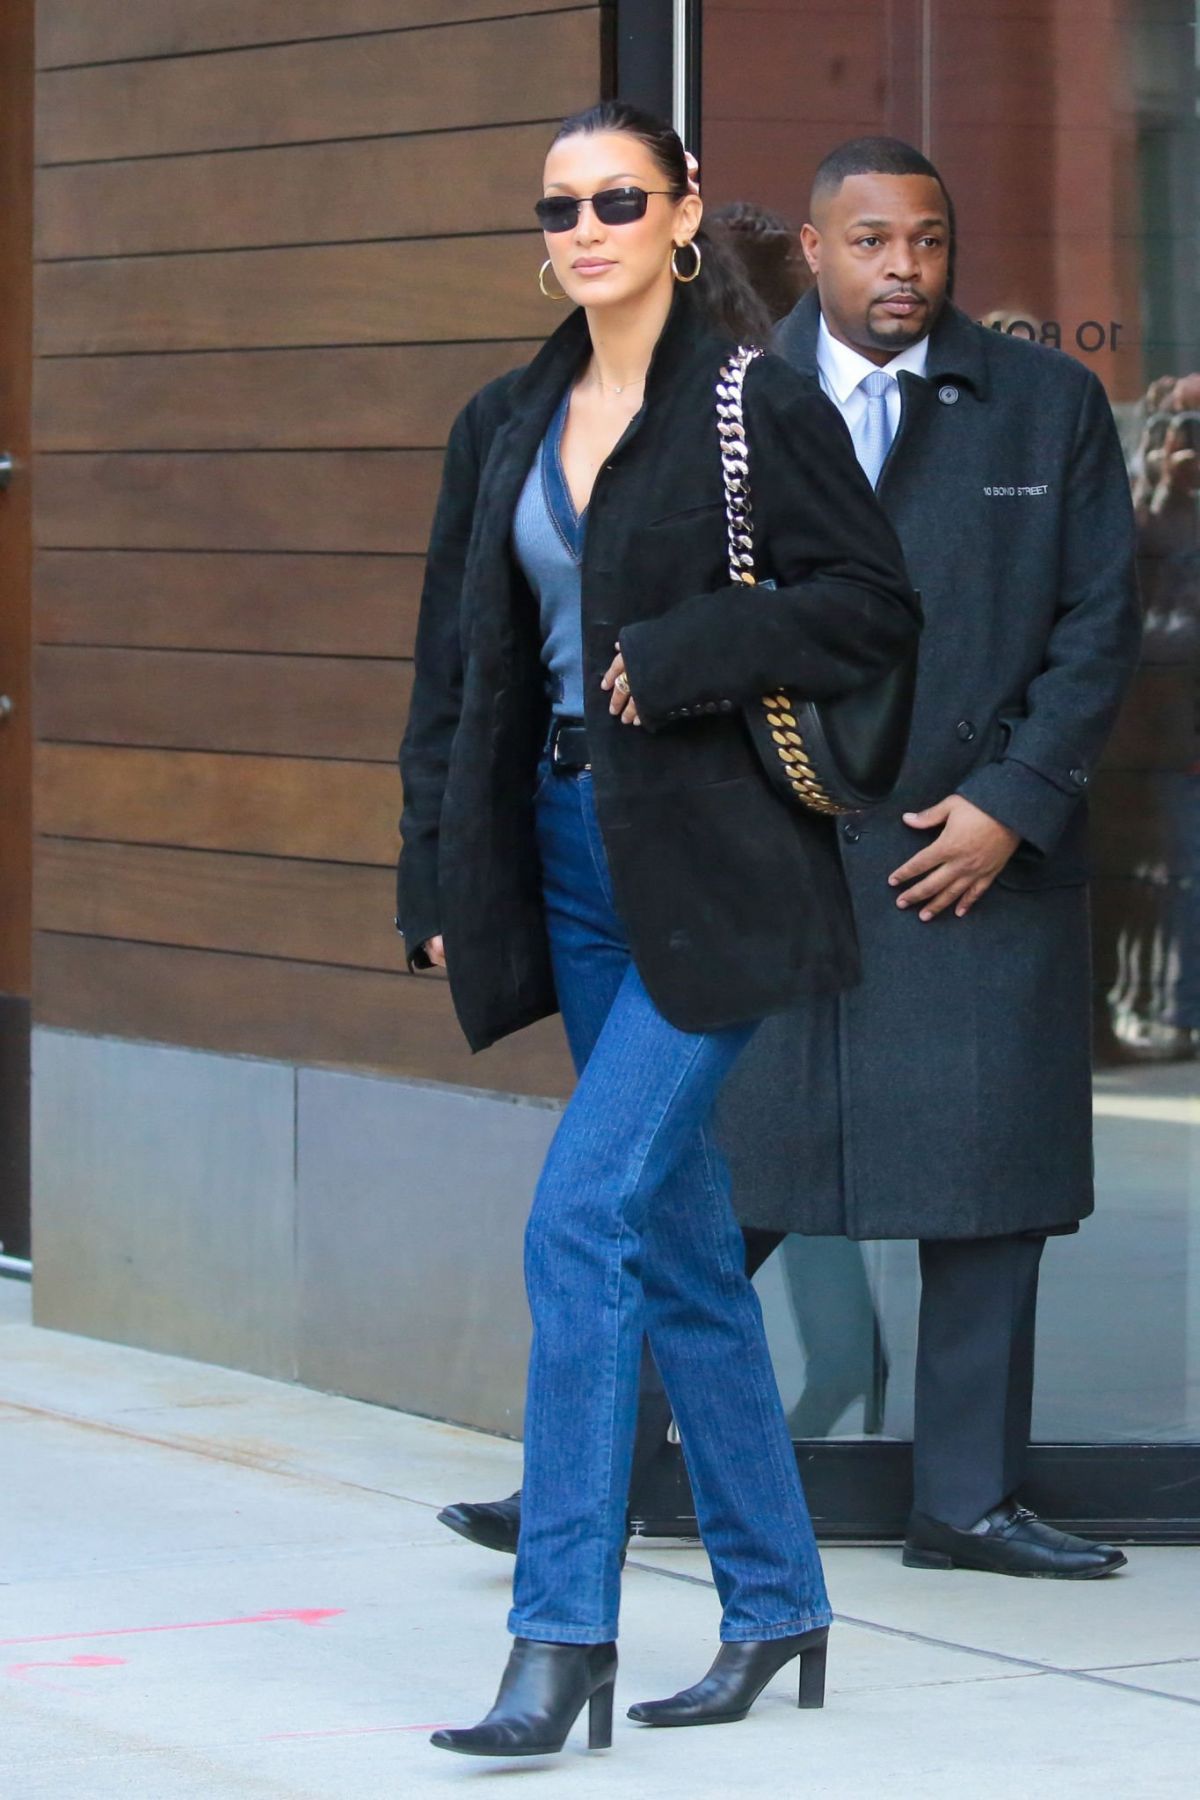 Bella Hadid in Blue V-Neck and Stella McCartney Bag in NYC 4